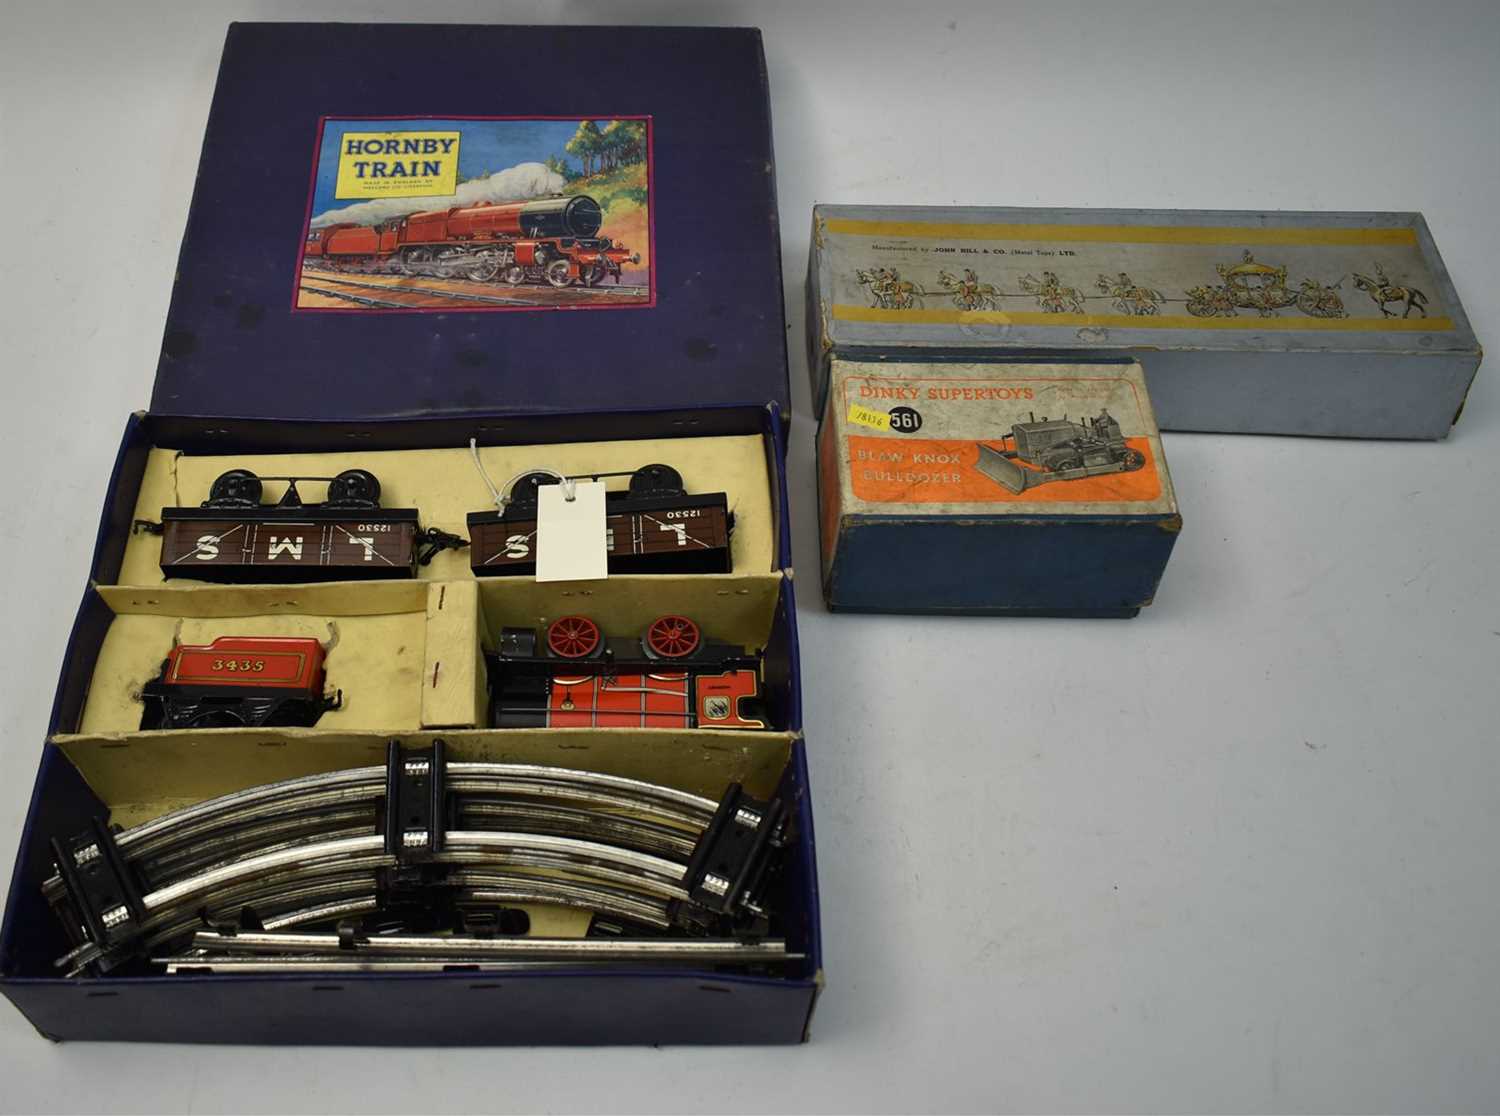 Lot 144 - Hornby Train Set, Coronation coach and Dinky digger